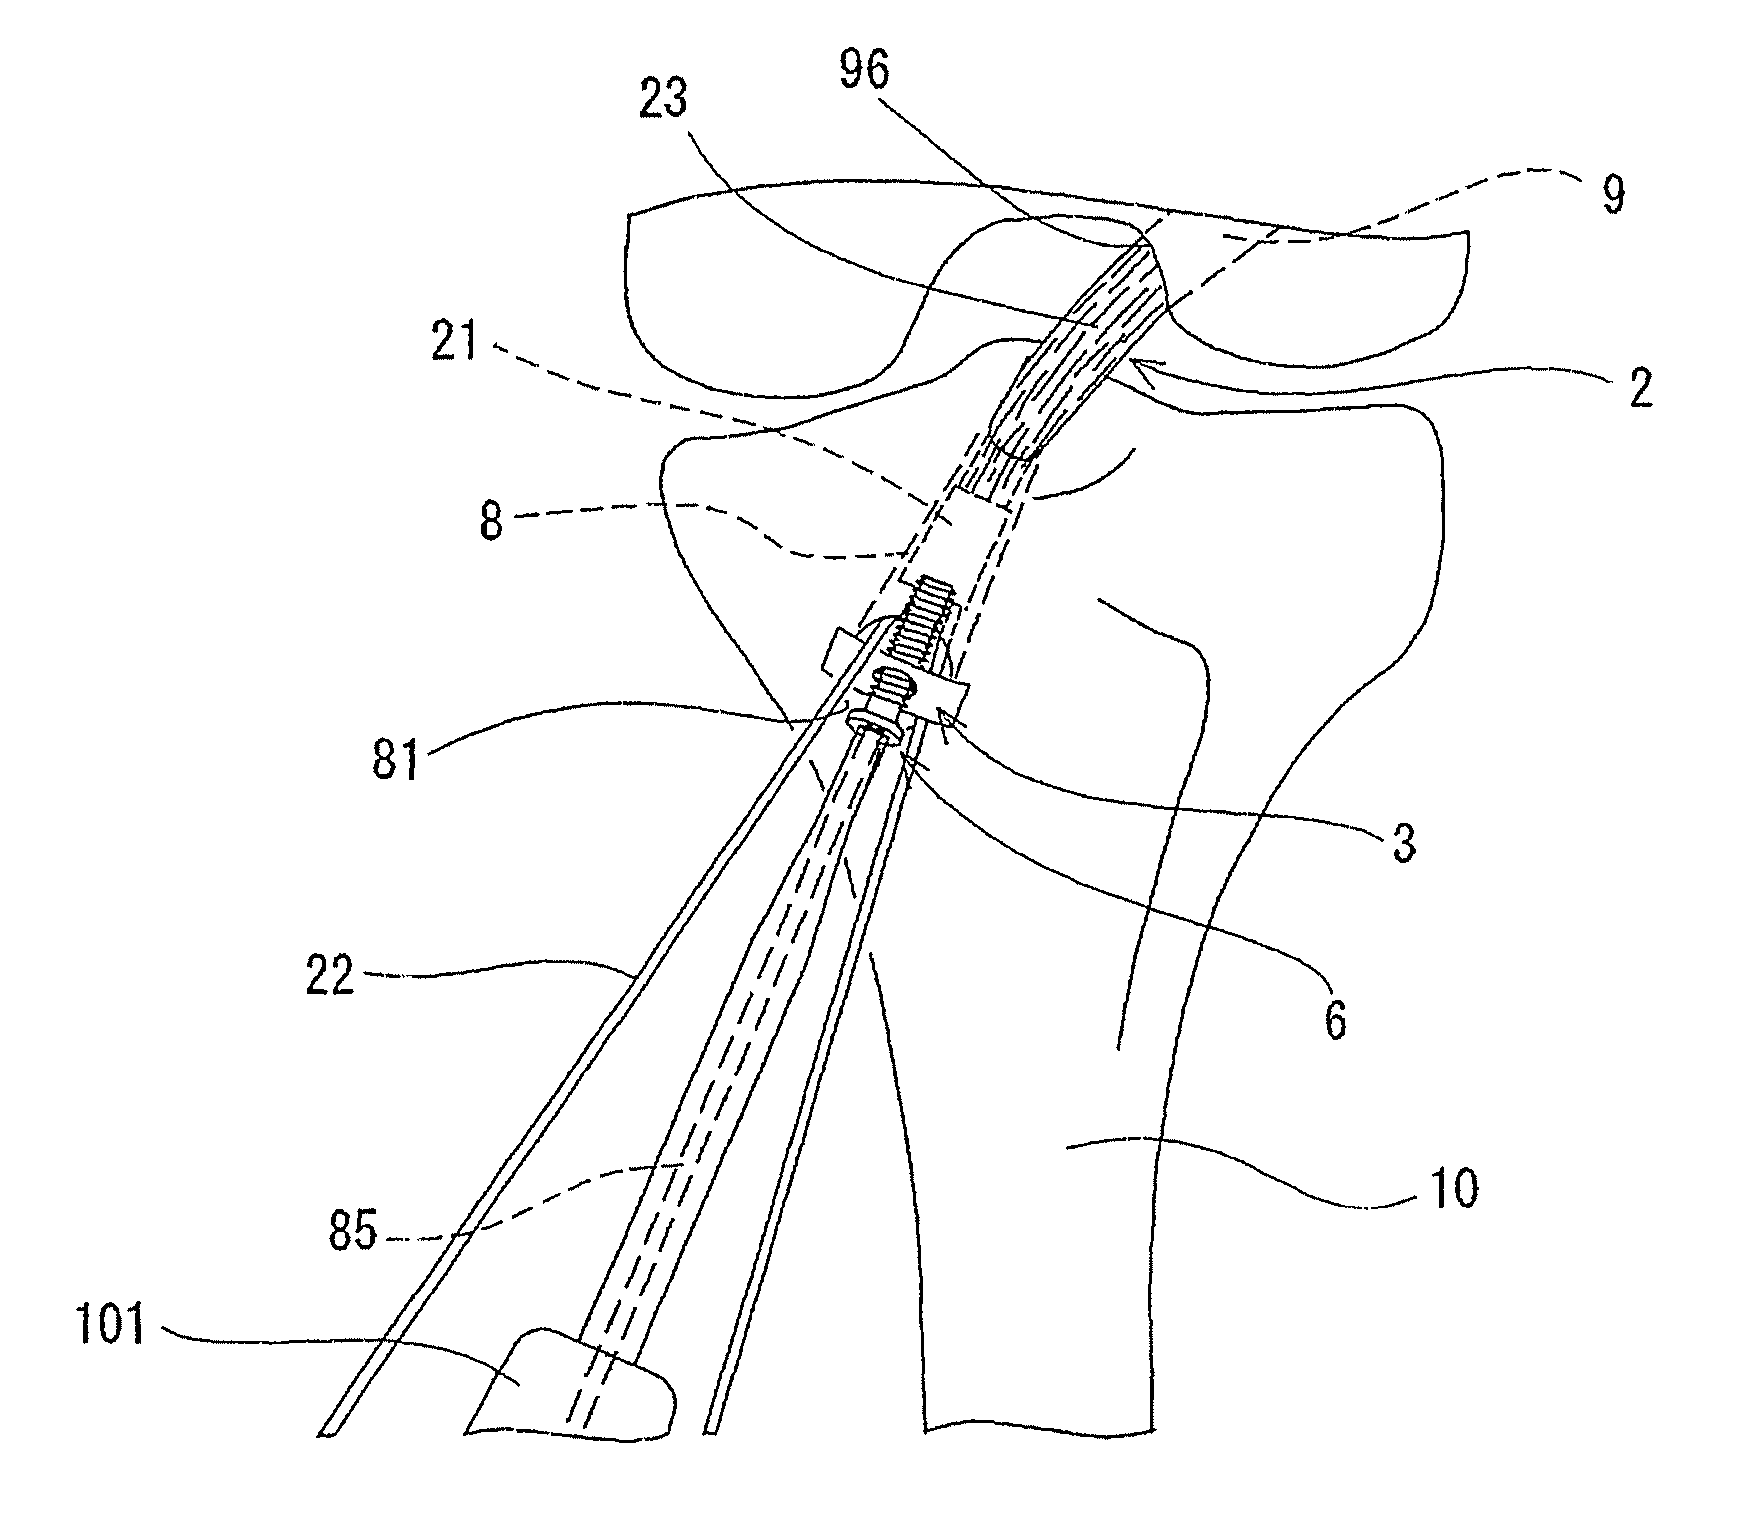 Tensile force-adjustable fixing tool for fixing tendon graft and ligament reconstruction method